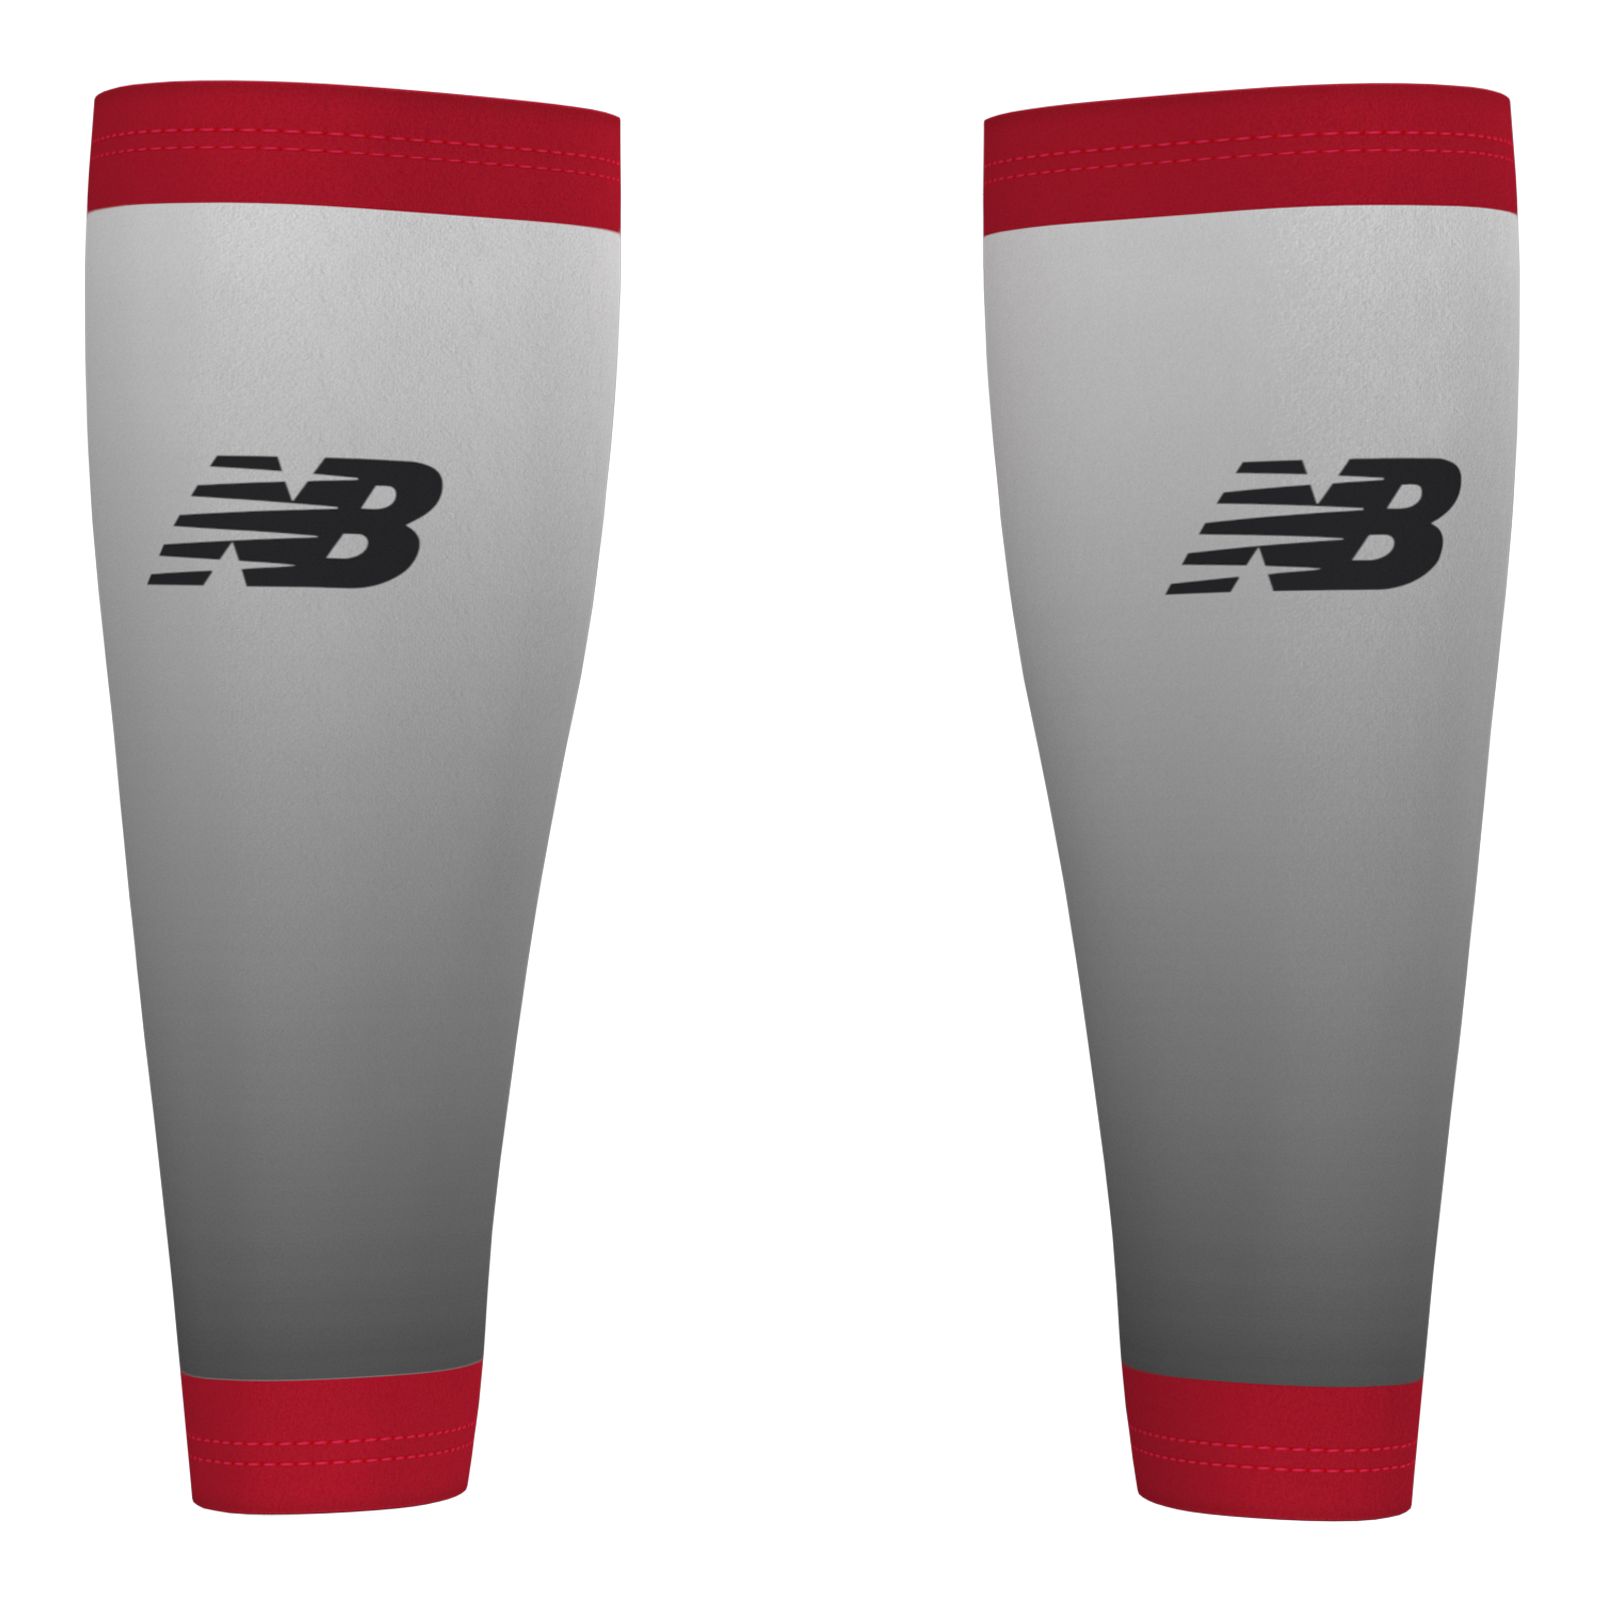  New Balance Unisex Outdoor Sports Compression Leg Sleeve and  Warmer, Black, Small and Medium : Health & Household